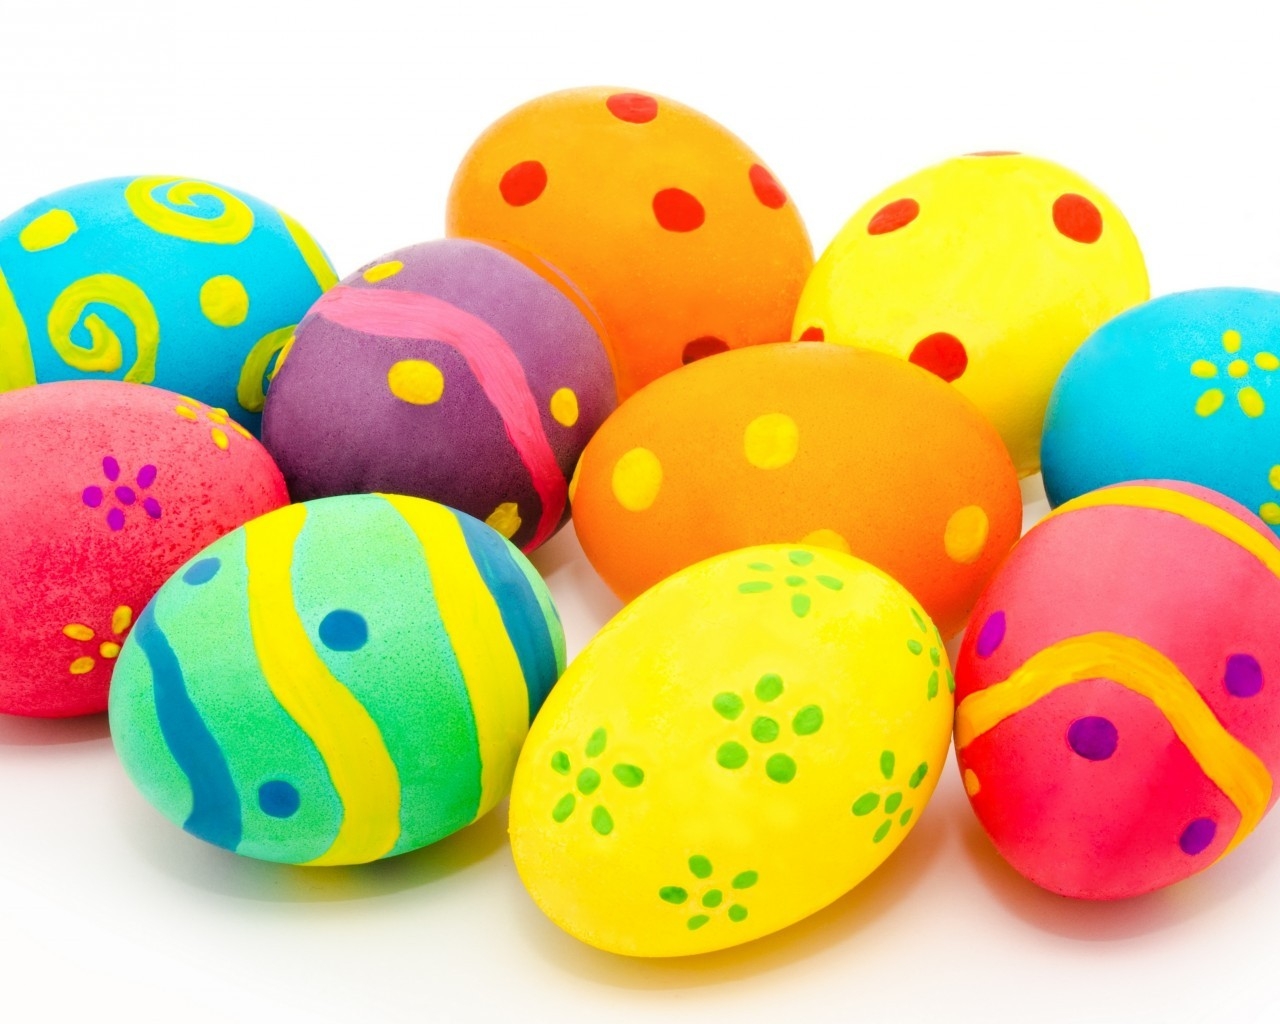 Many Colorful Easter Eggs for 1280 x 1024 resolution